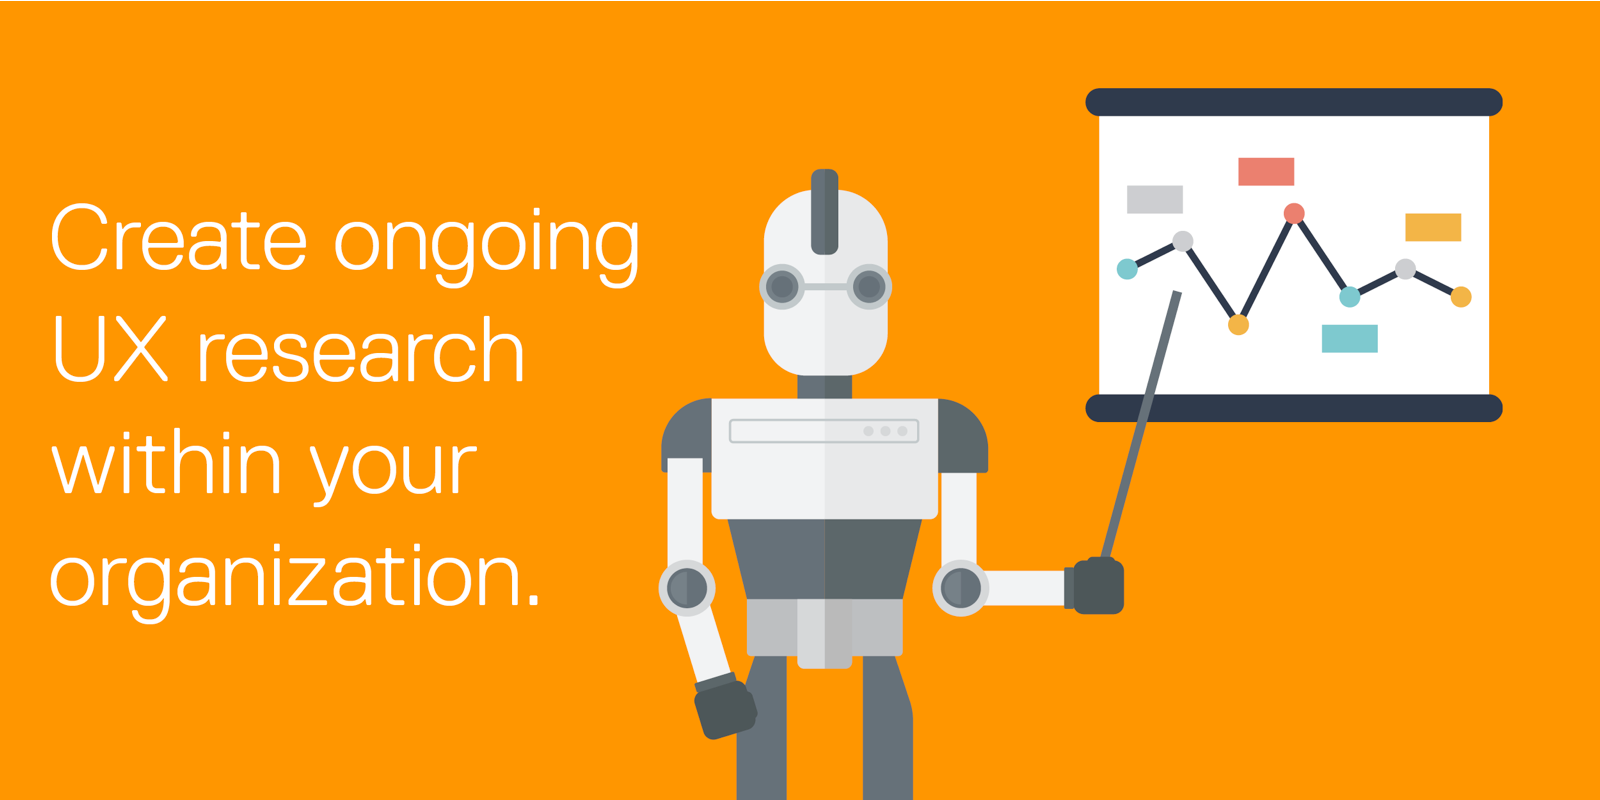 Create ongoing UX research within your organization.